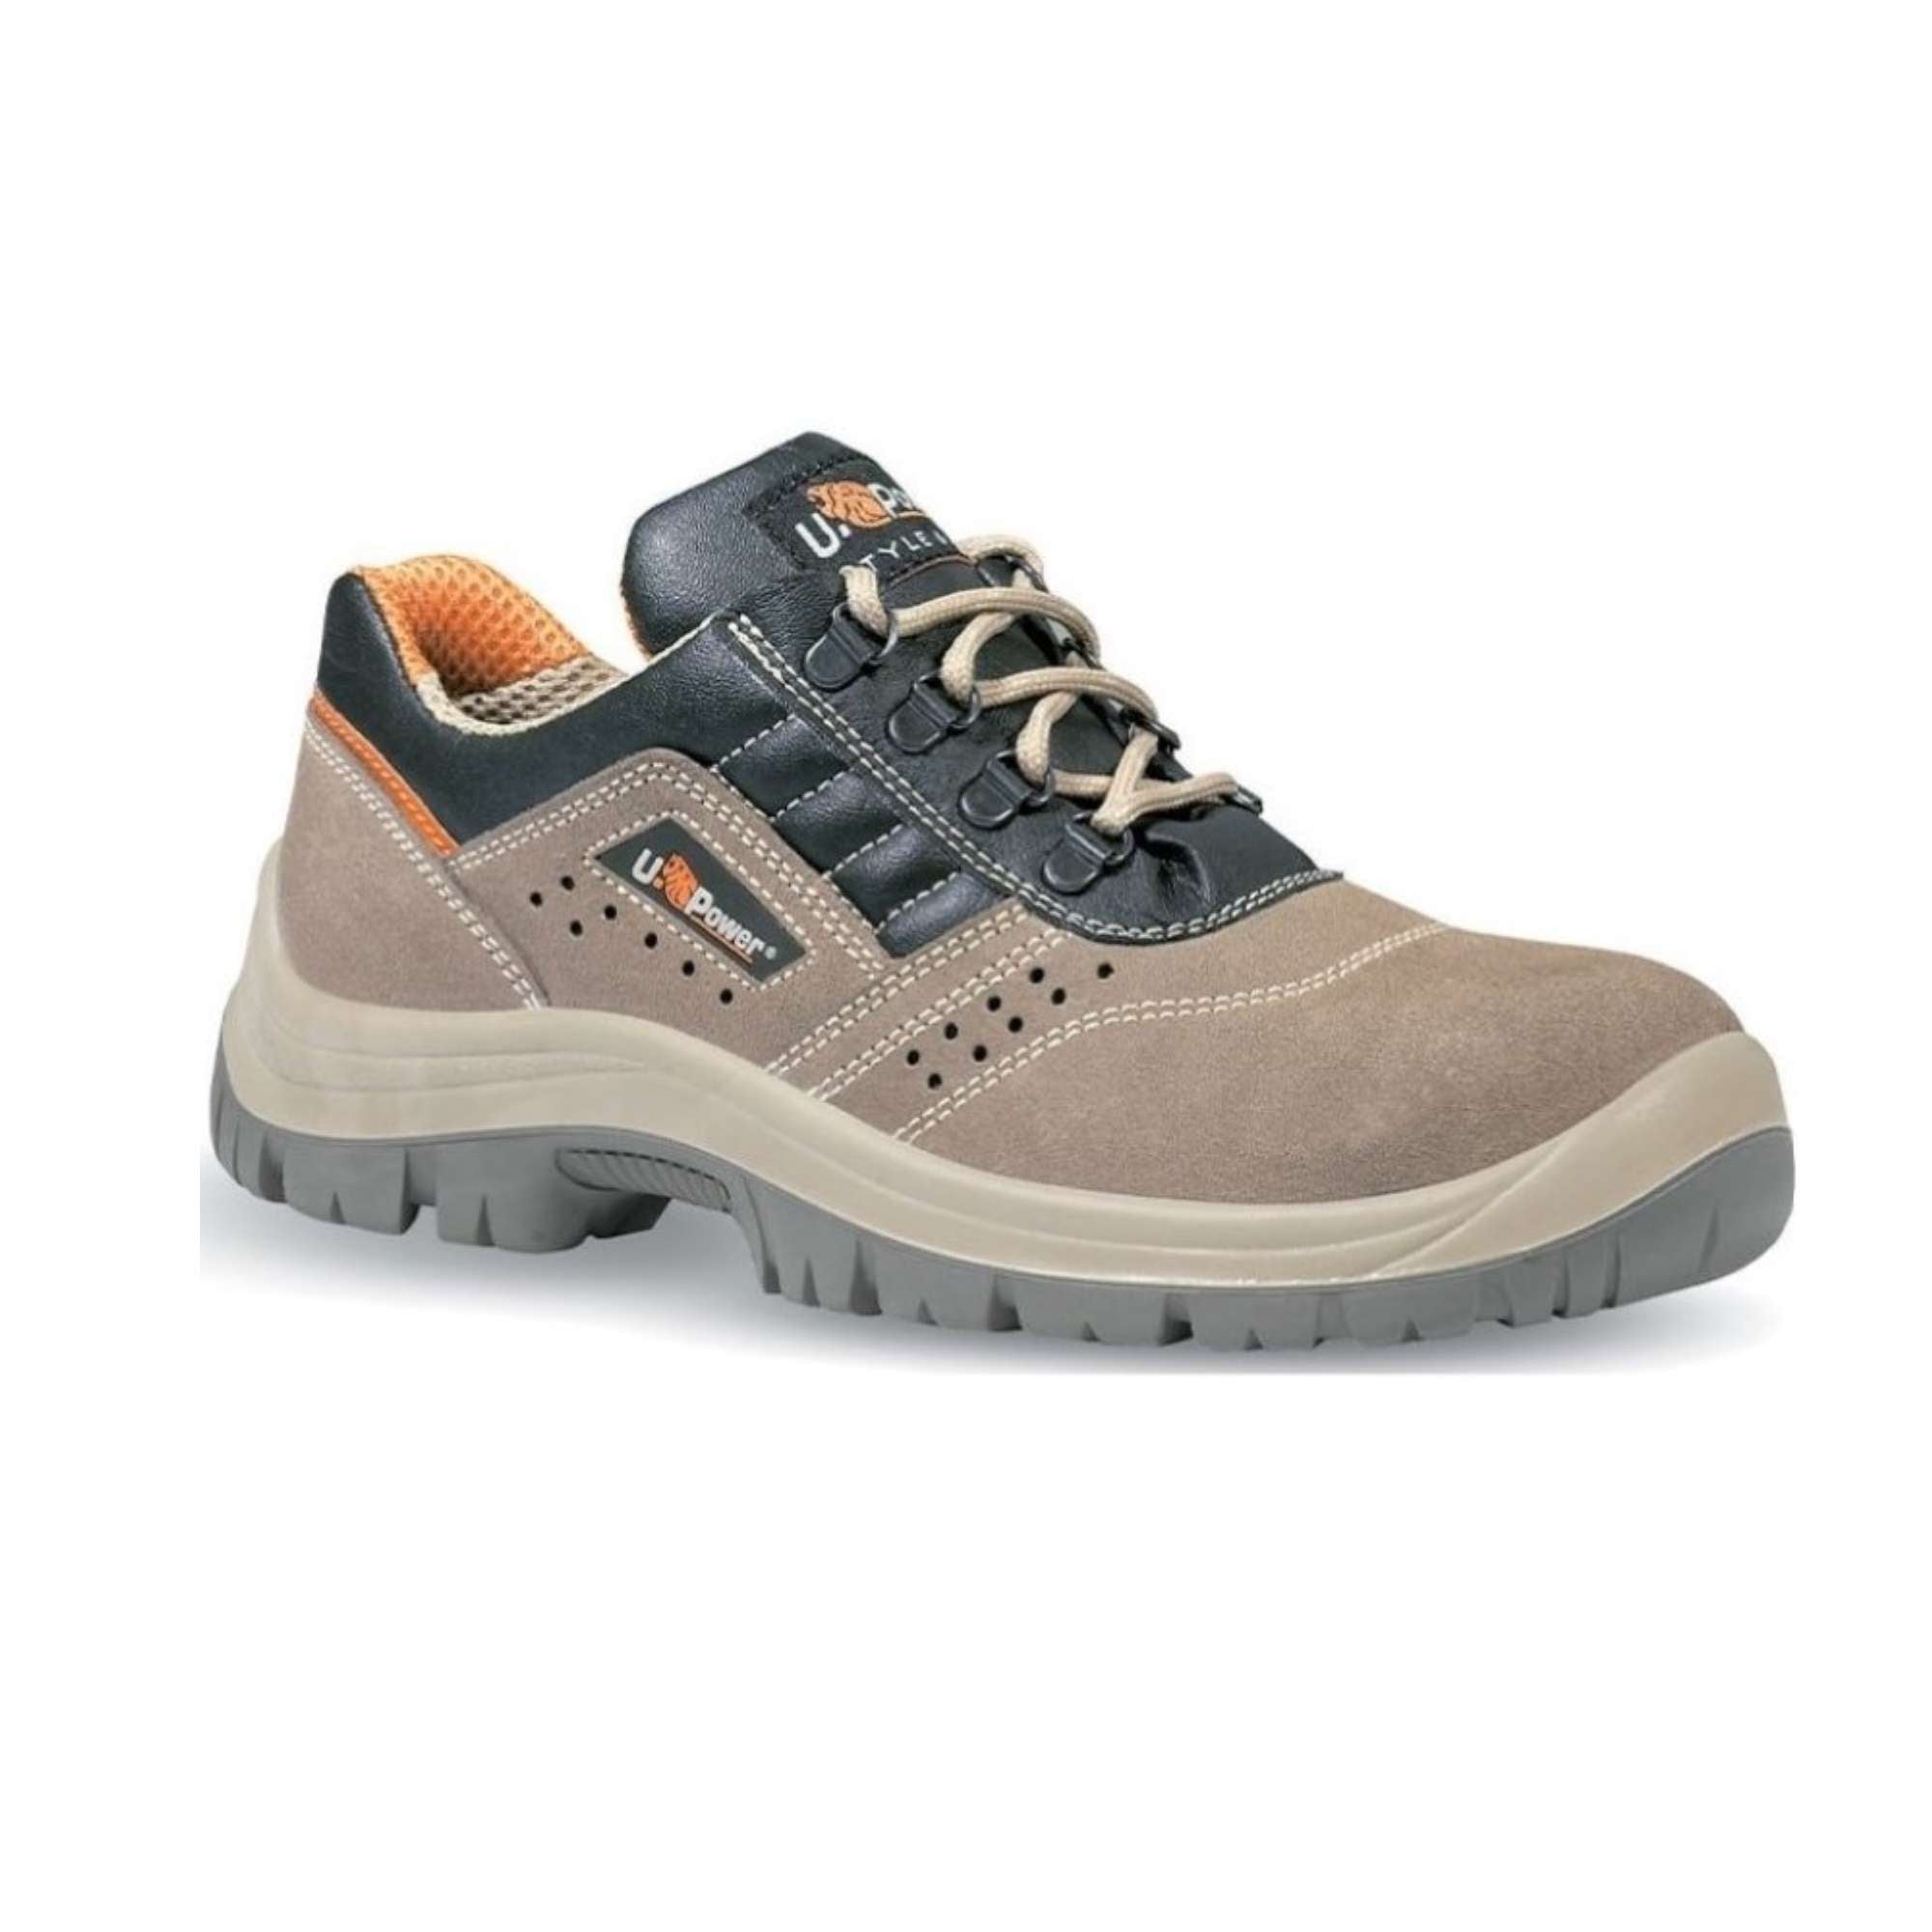 EARTH/DREAM SHOE S1P- UPOWER S020195(39-40-41-42-43-44-45-46)